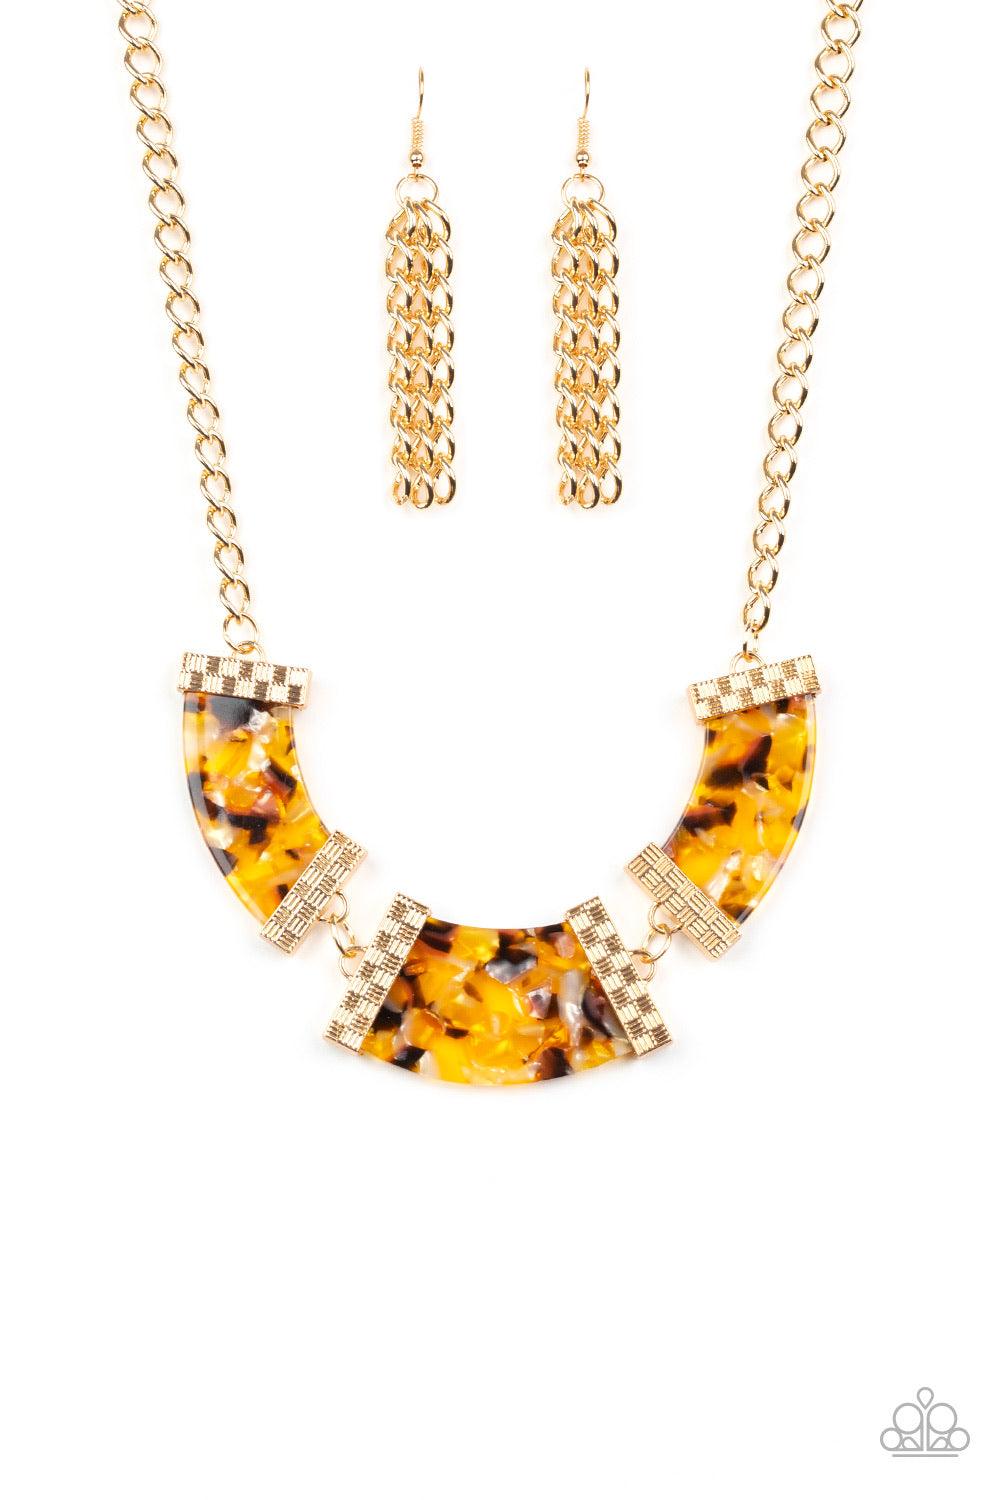 Paparazzi Accessories HAUTE Blooded - Yellow A trio of speckled acrylic frames are nestled inside checker textured gold fittings as they link below the collar for a seasonal flair. Features an adjustable clasp closure. Jewelry